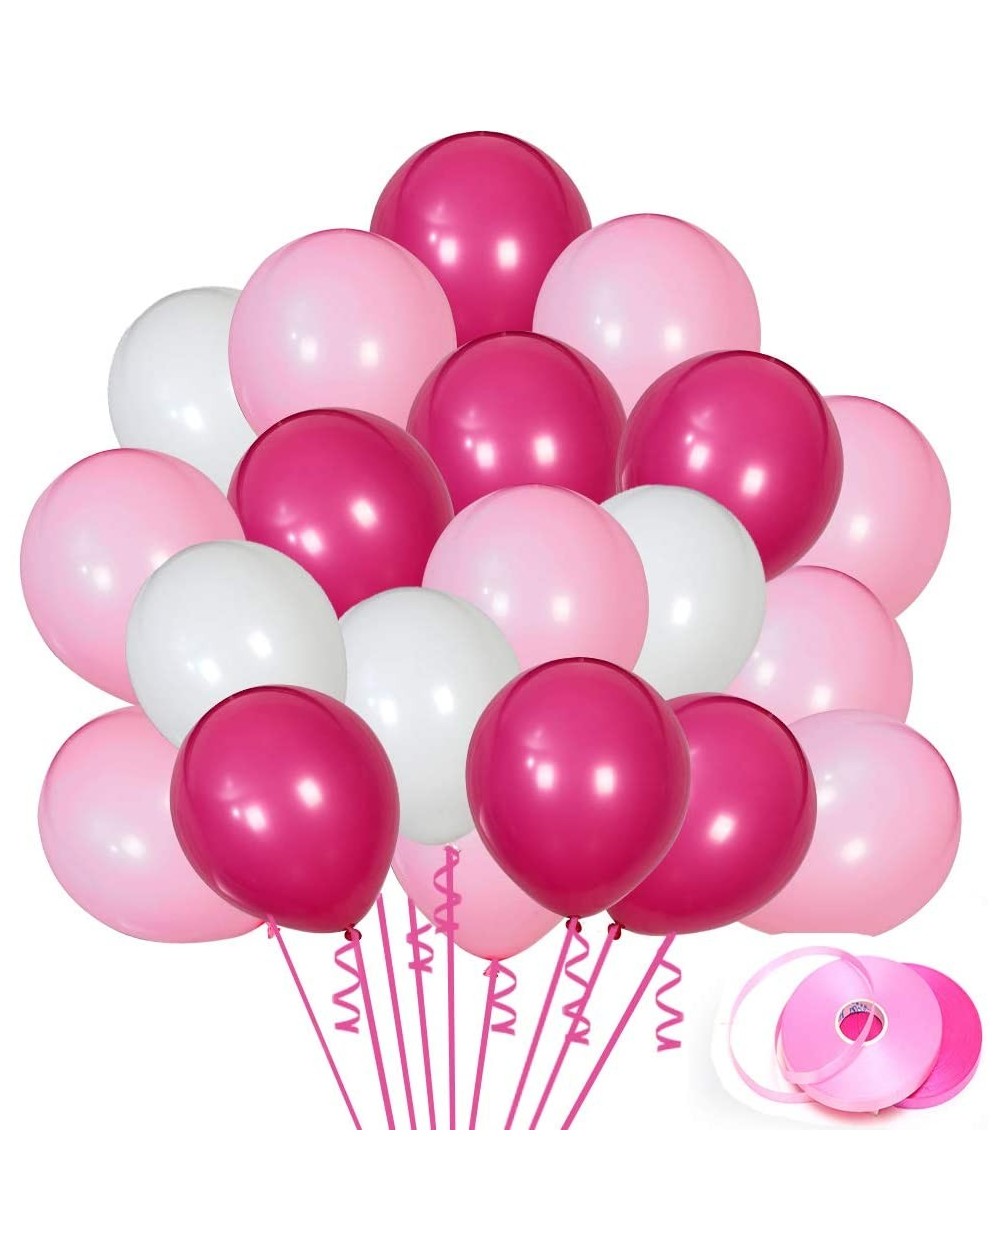 Balloons 100Pack Rose red White Pink Balloons- 12Inch Rose Red White Pink Latex Balloons Premium Helium Quality Pink Balloon ...